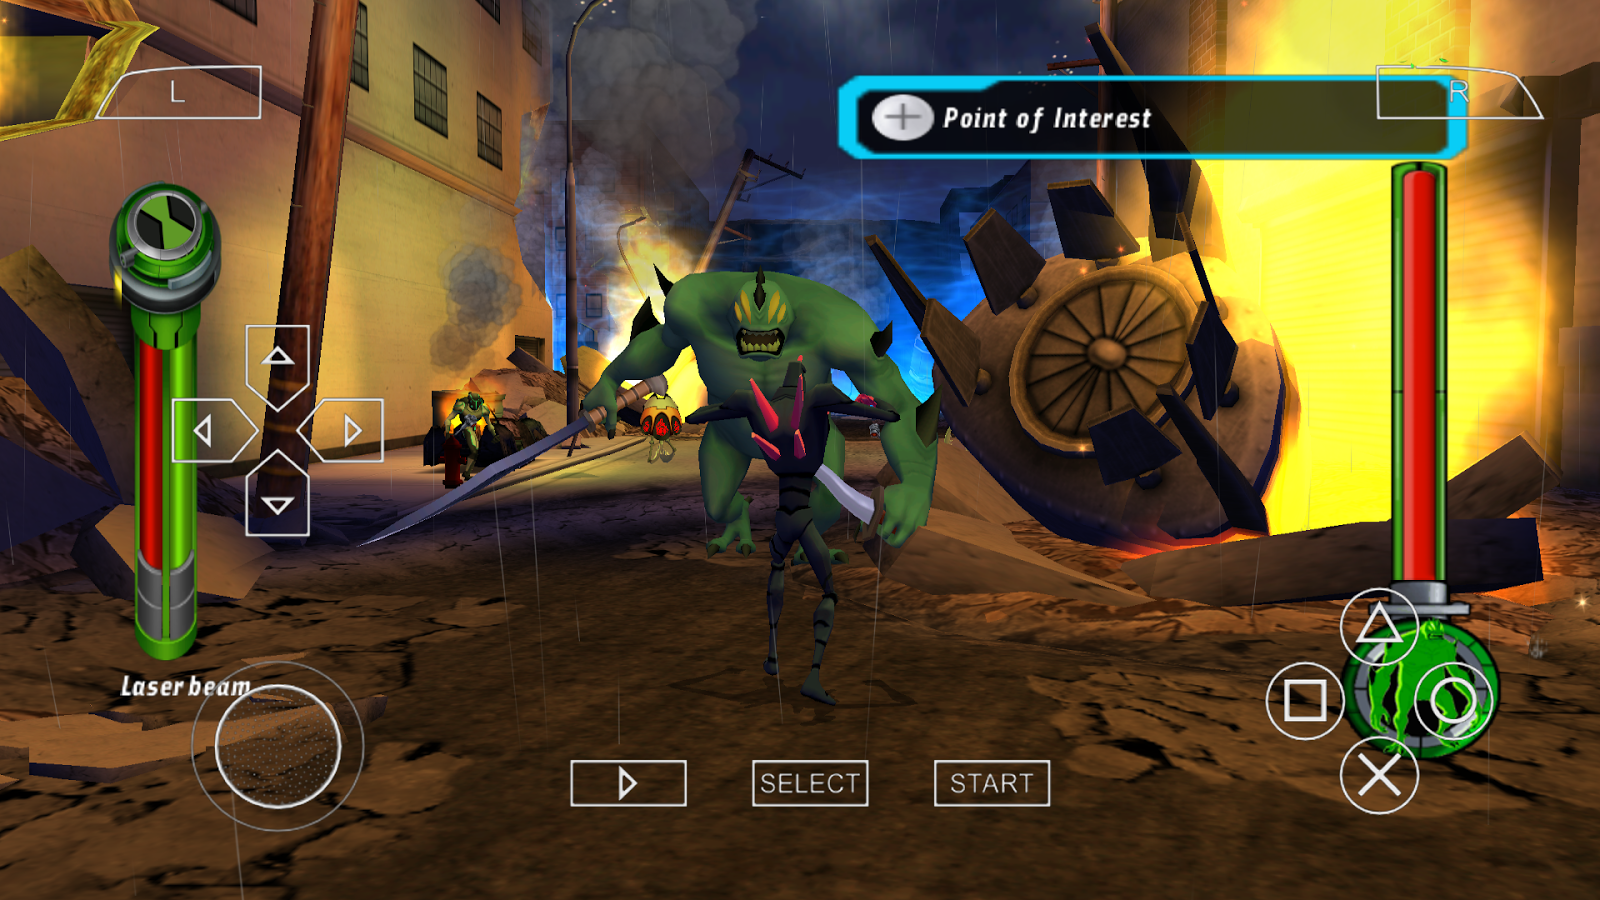 975bf ben 10 alien force vilgax attacks 2528game2529 25282025292bcopy - PPSSPP Games Highly Compressed (Top 35 Games)